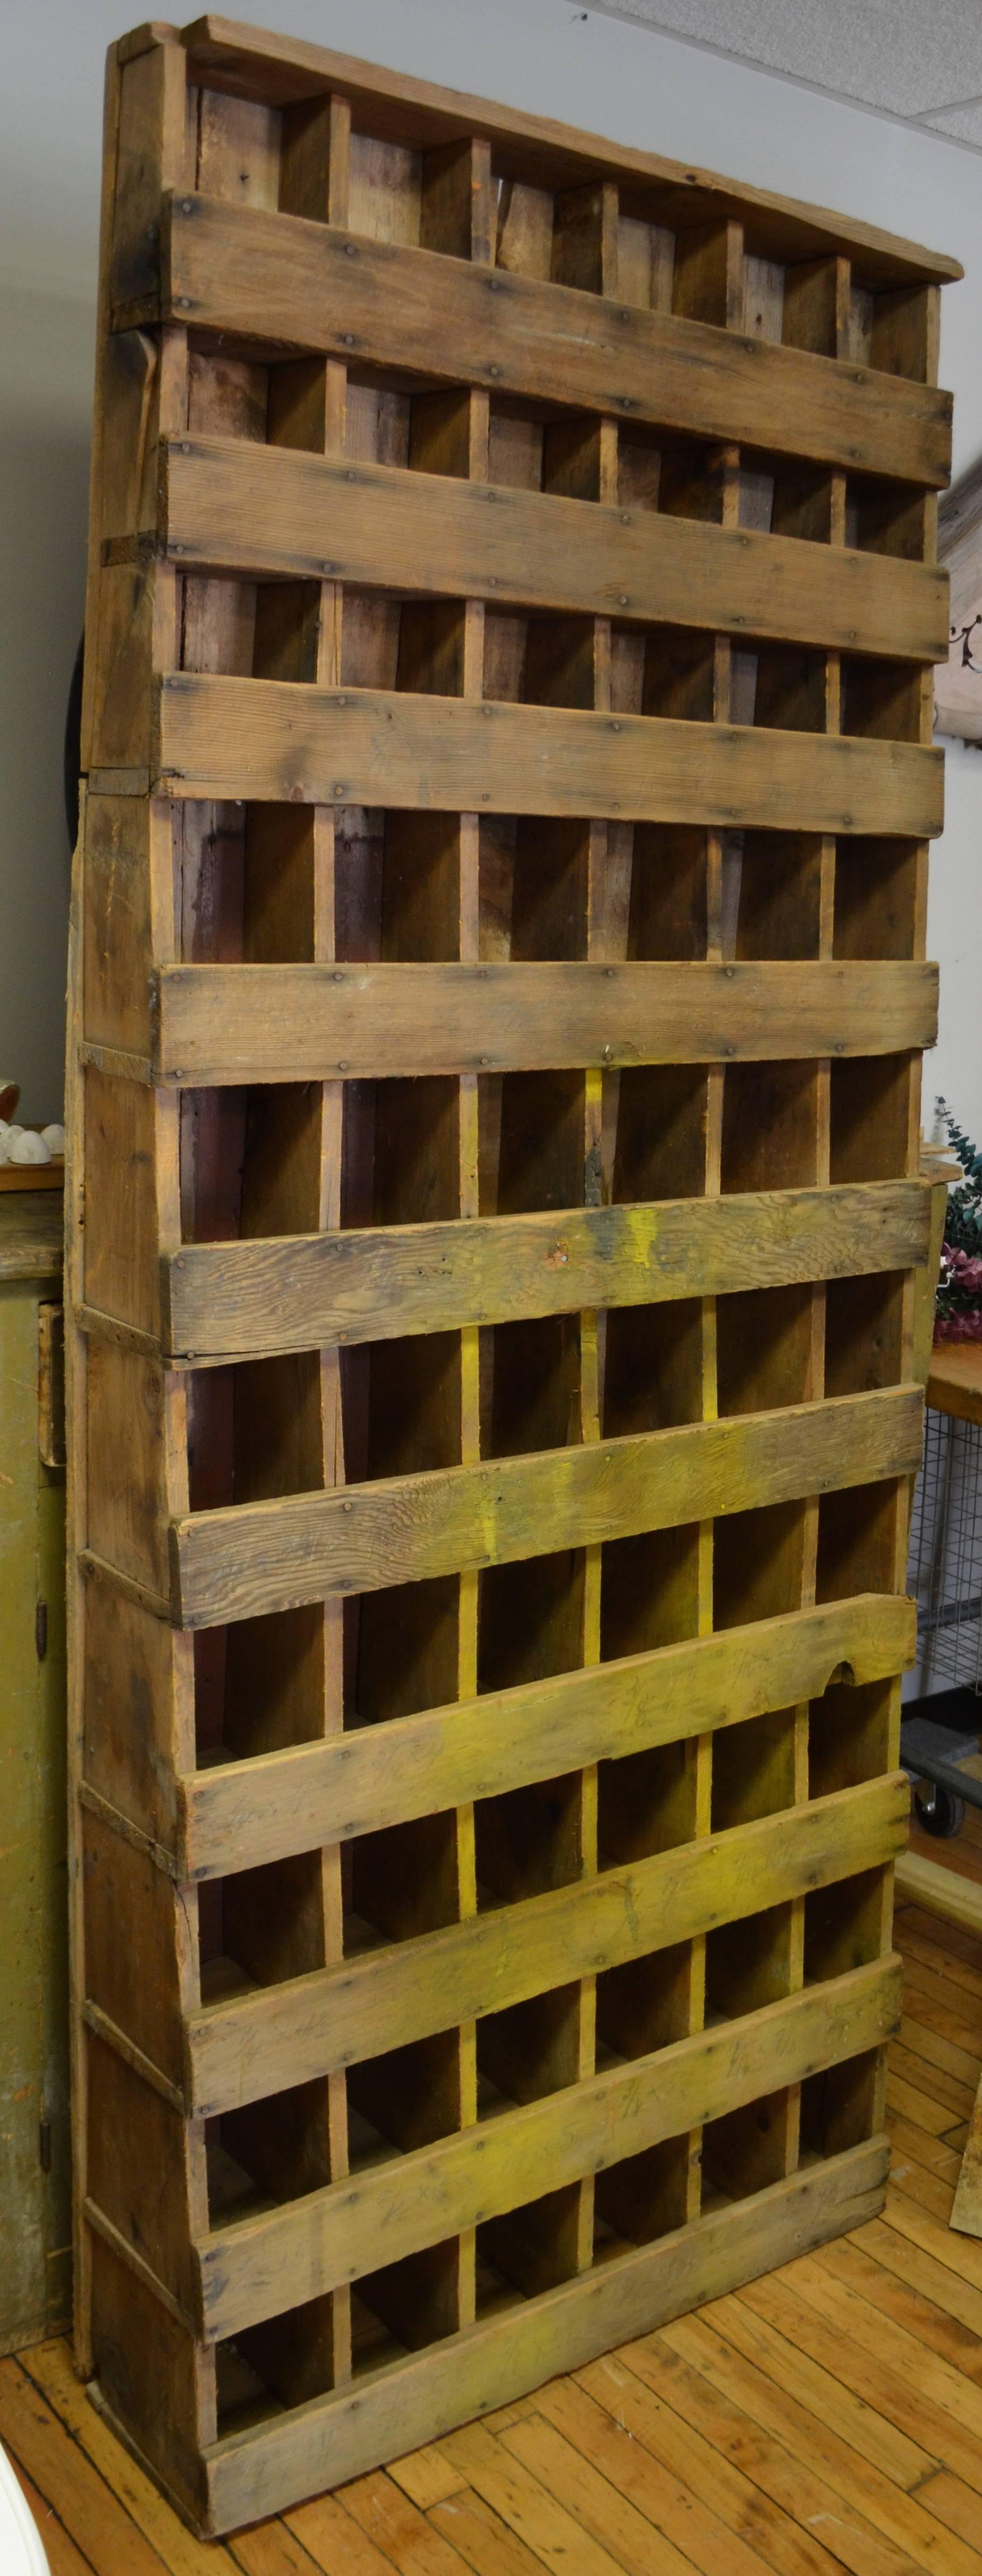 Primitive, hand-built, wooden farm cabinet in an A-shape where the depth is 5" at top, 10.75" at bottom. Rustic but solid, lightly sanded, cleaned and sealed. Versatile depository for any number of small items.